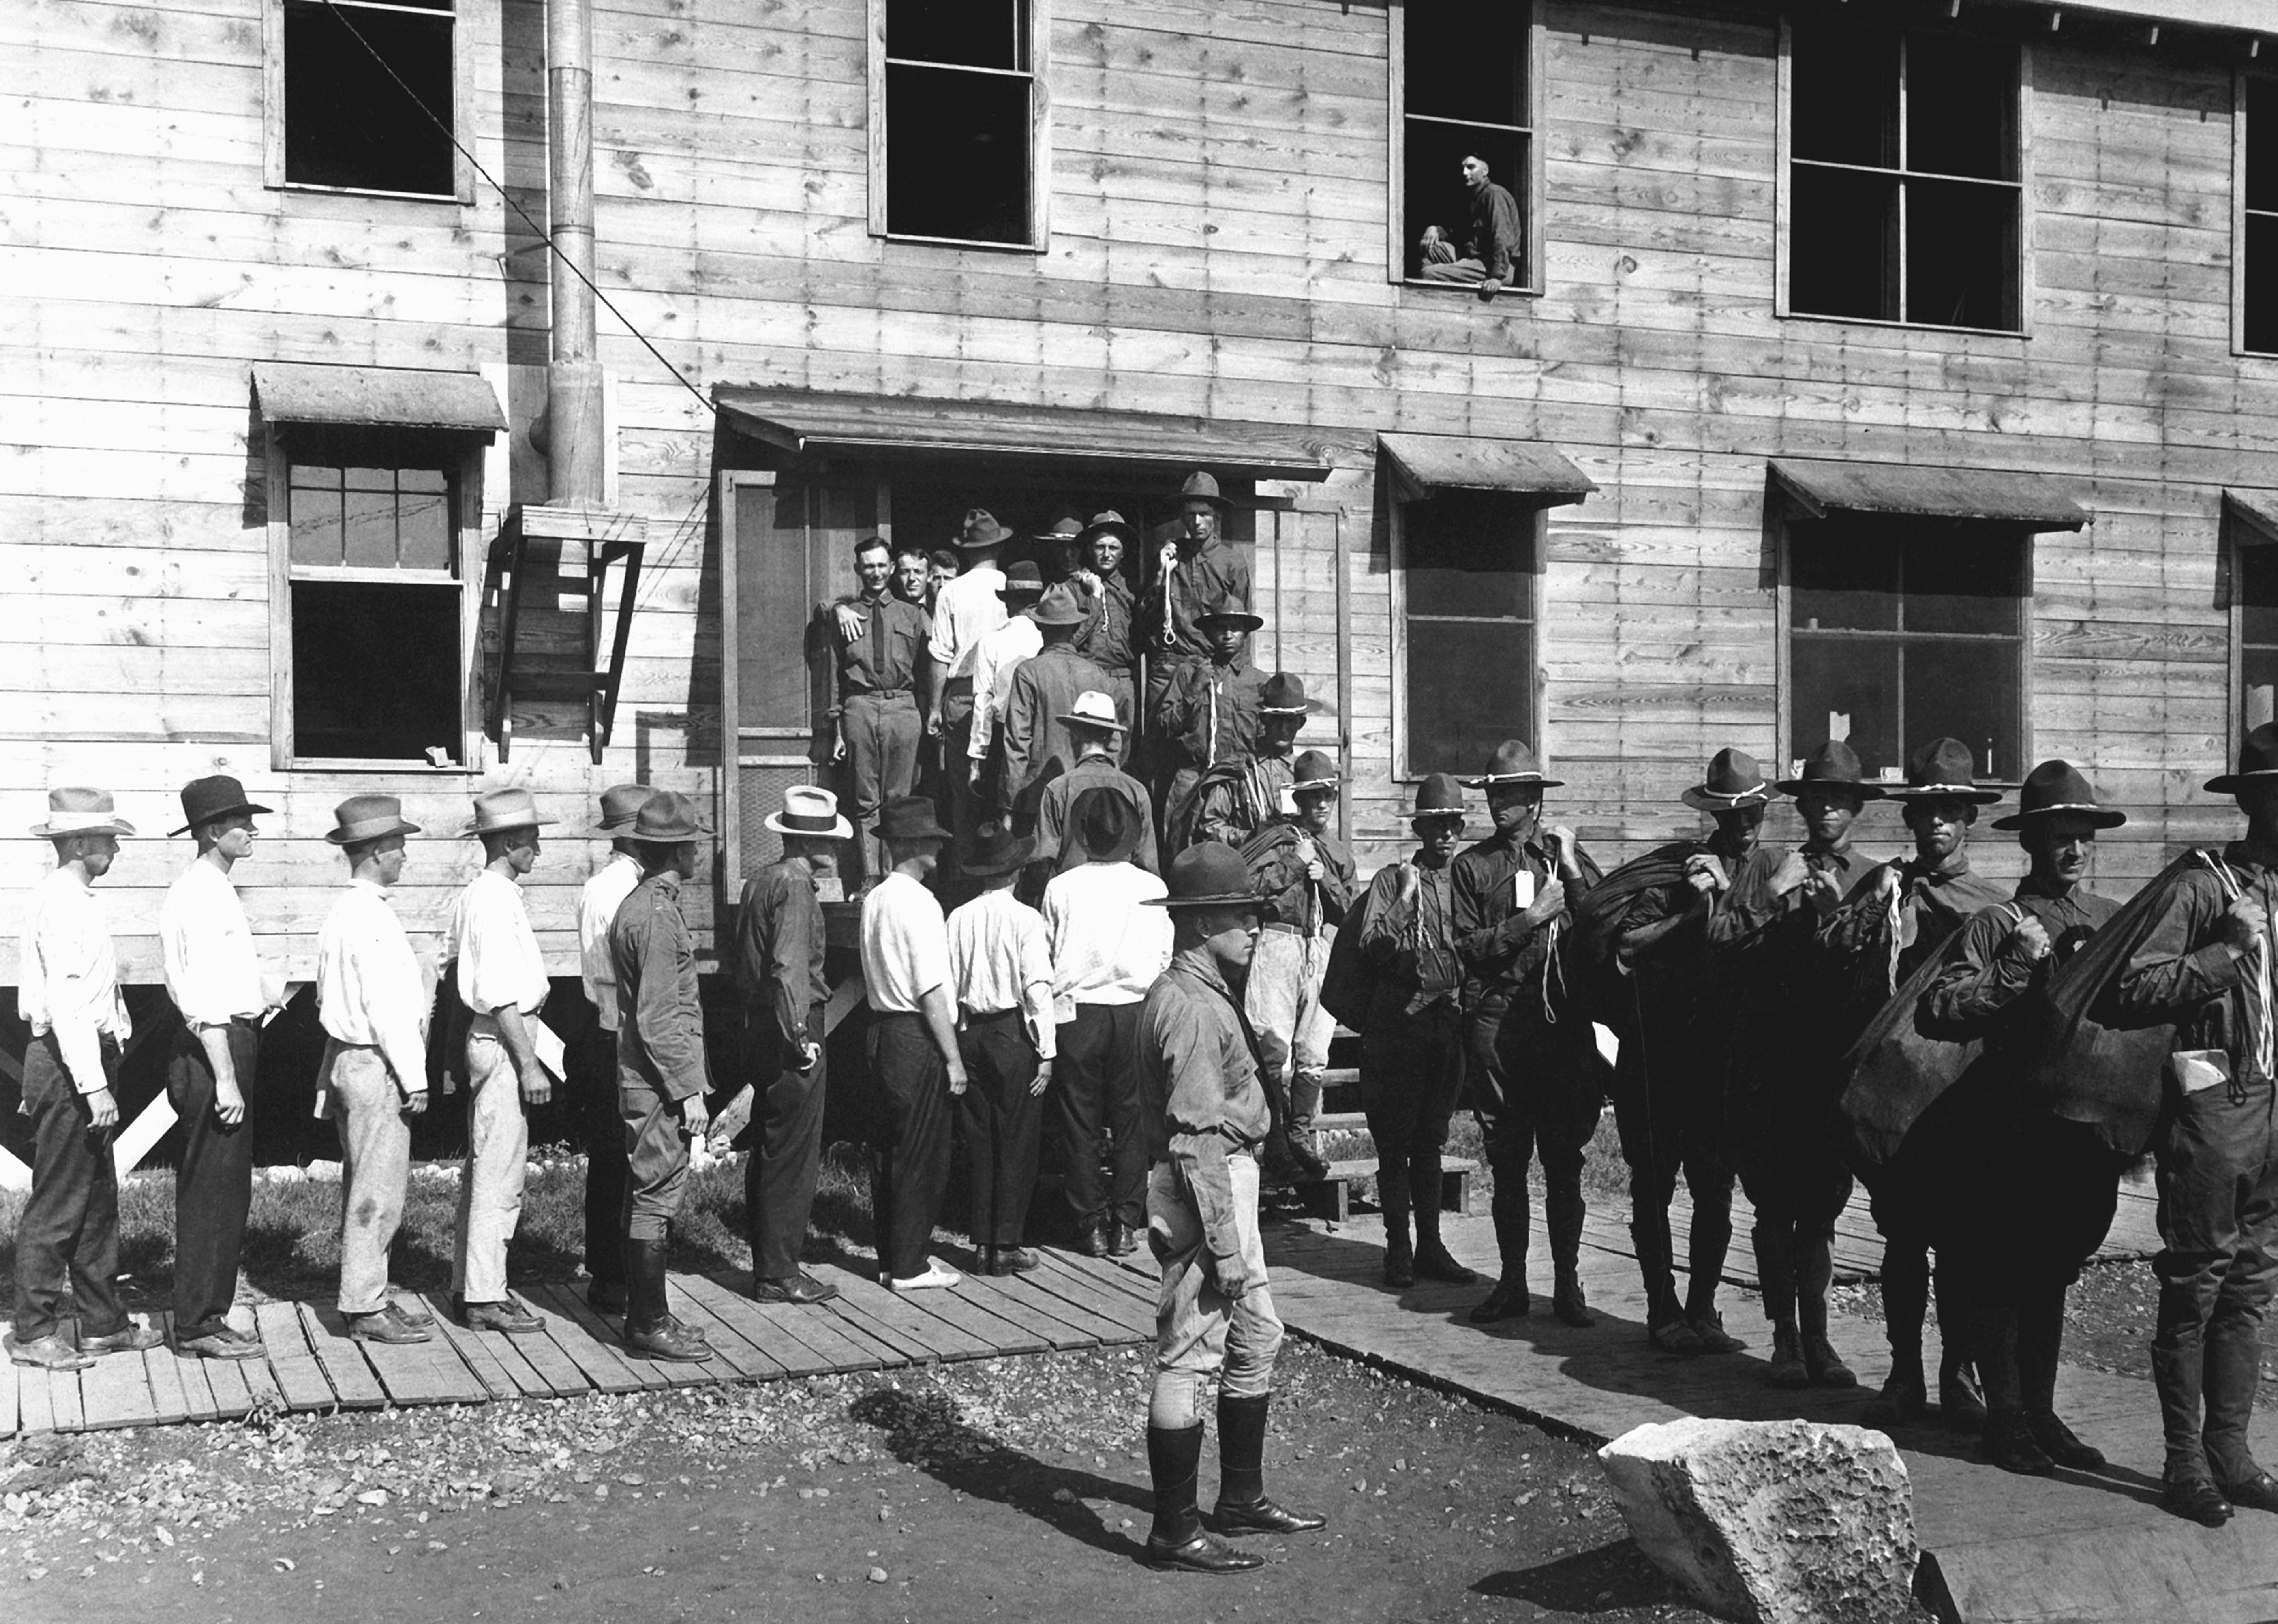 A line of civilian men, drafted for service, entering a building to report for duty and exiting in uniform.